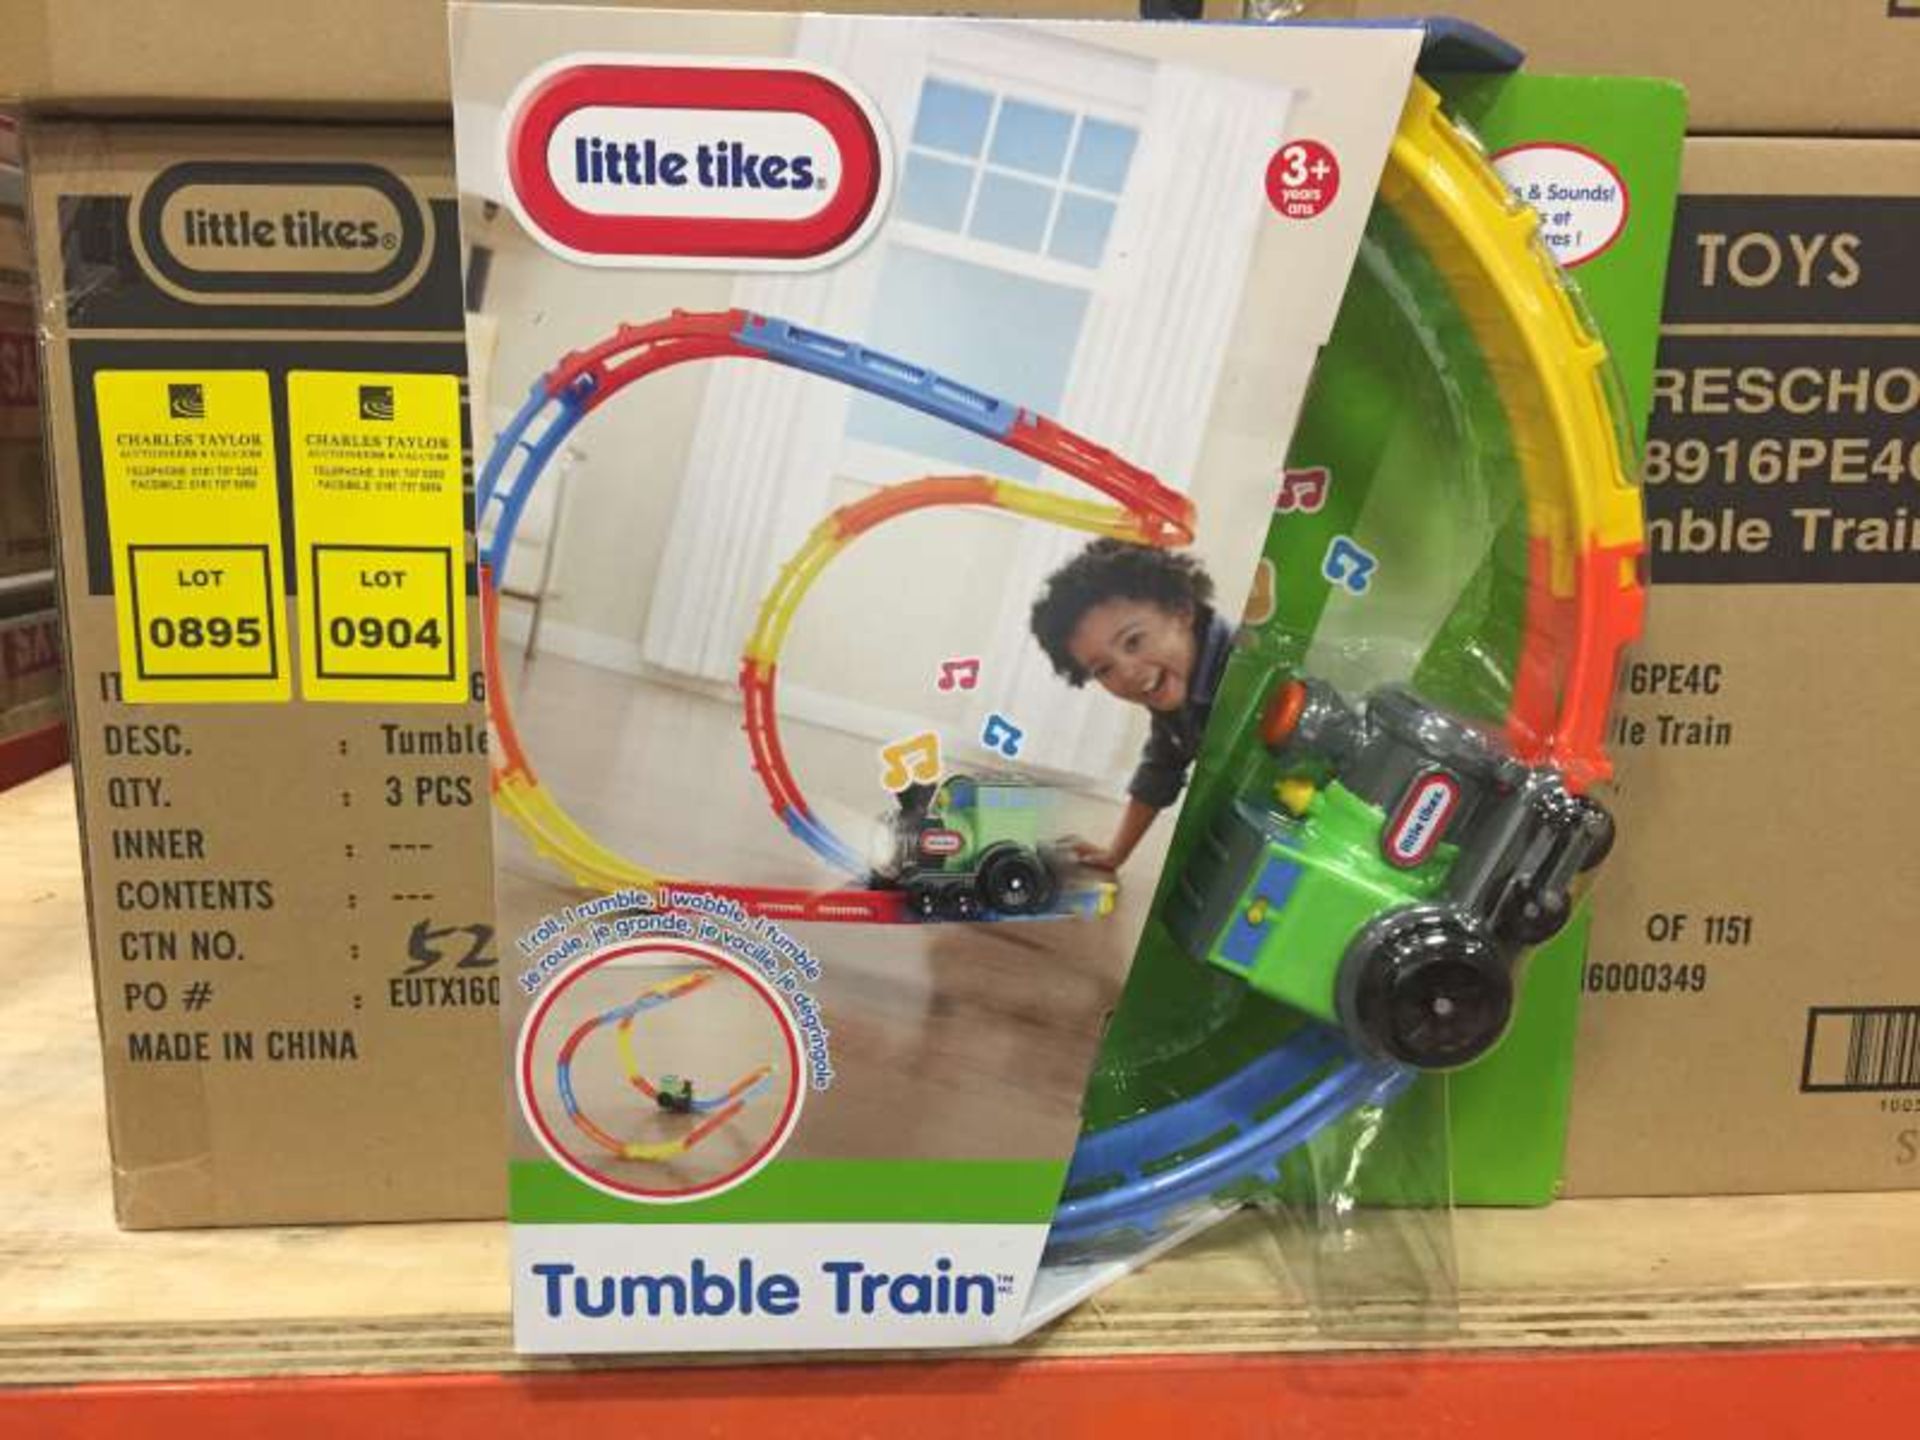 24 X BRAND NEW BOXED LITTLE TIKES TUMBLE TRAIN IN 8 BOXES